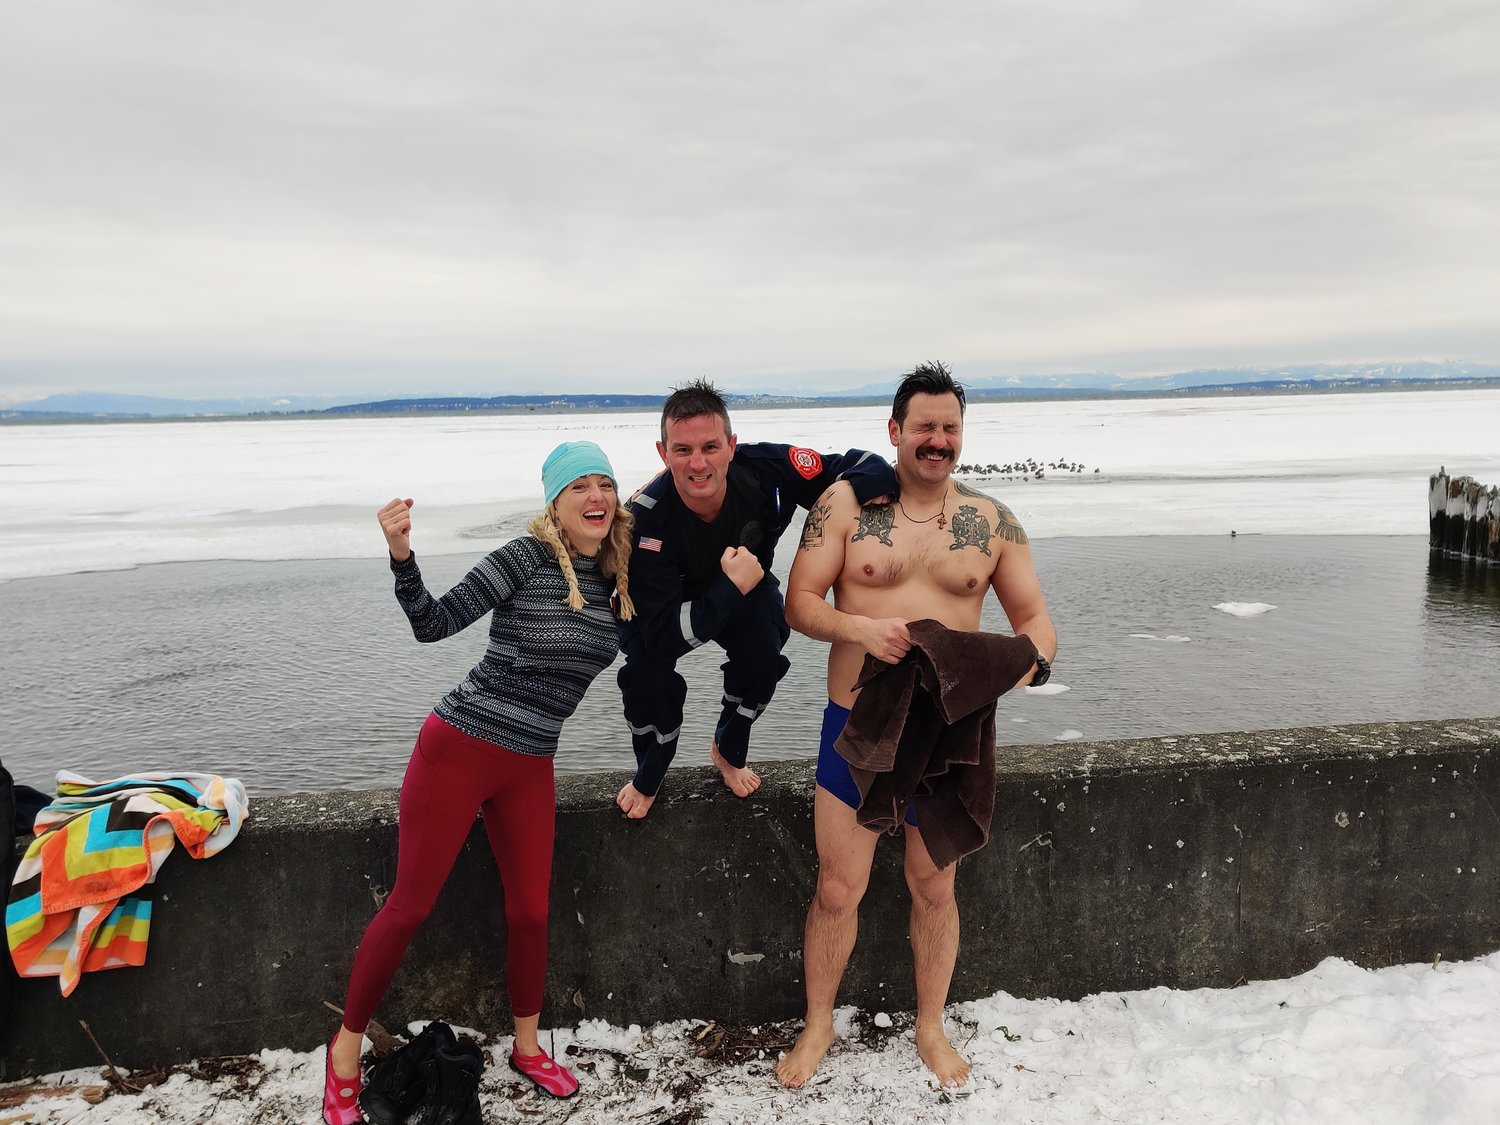 Only three swimmers braved the ultra-cold waters in the Annual Maple Beach Polar Bear Swim on January 1, 2022. Seen shivering are, from l., Savila Kress, Point Roberts fire district members Christian Craig, firefighter/AEMT and Boris Boskic, firefighter.